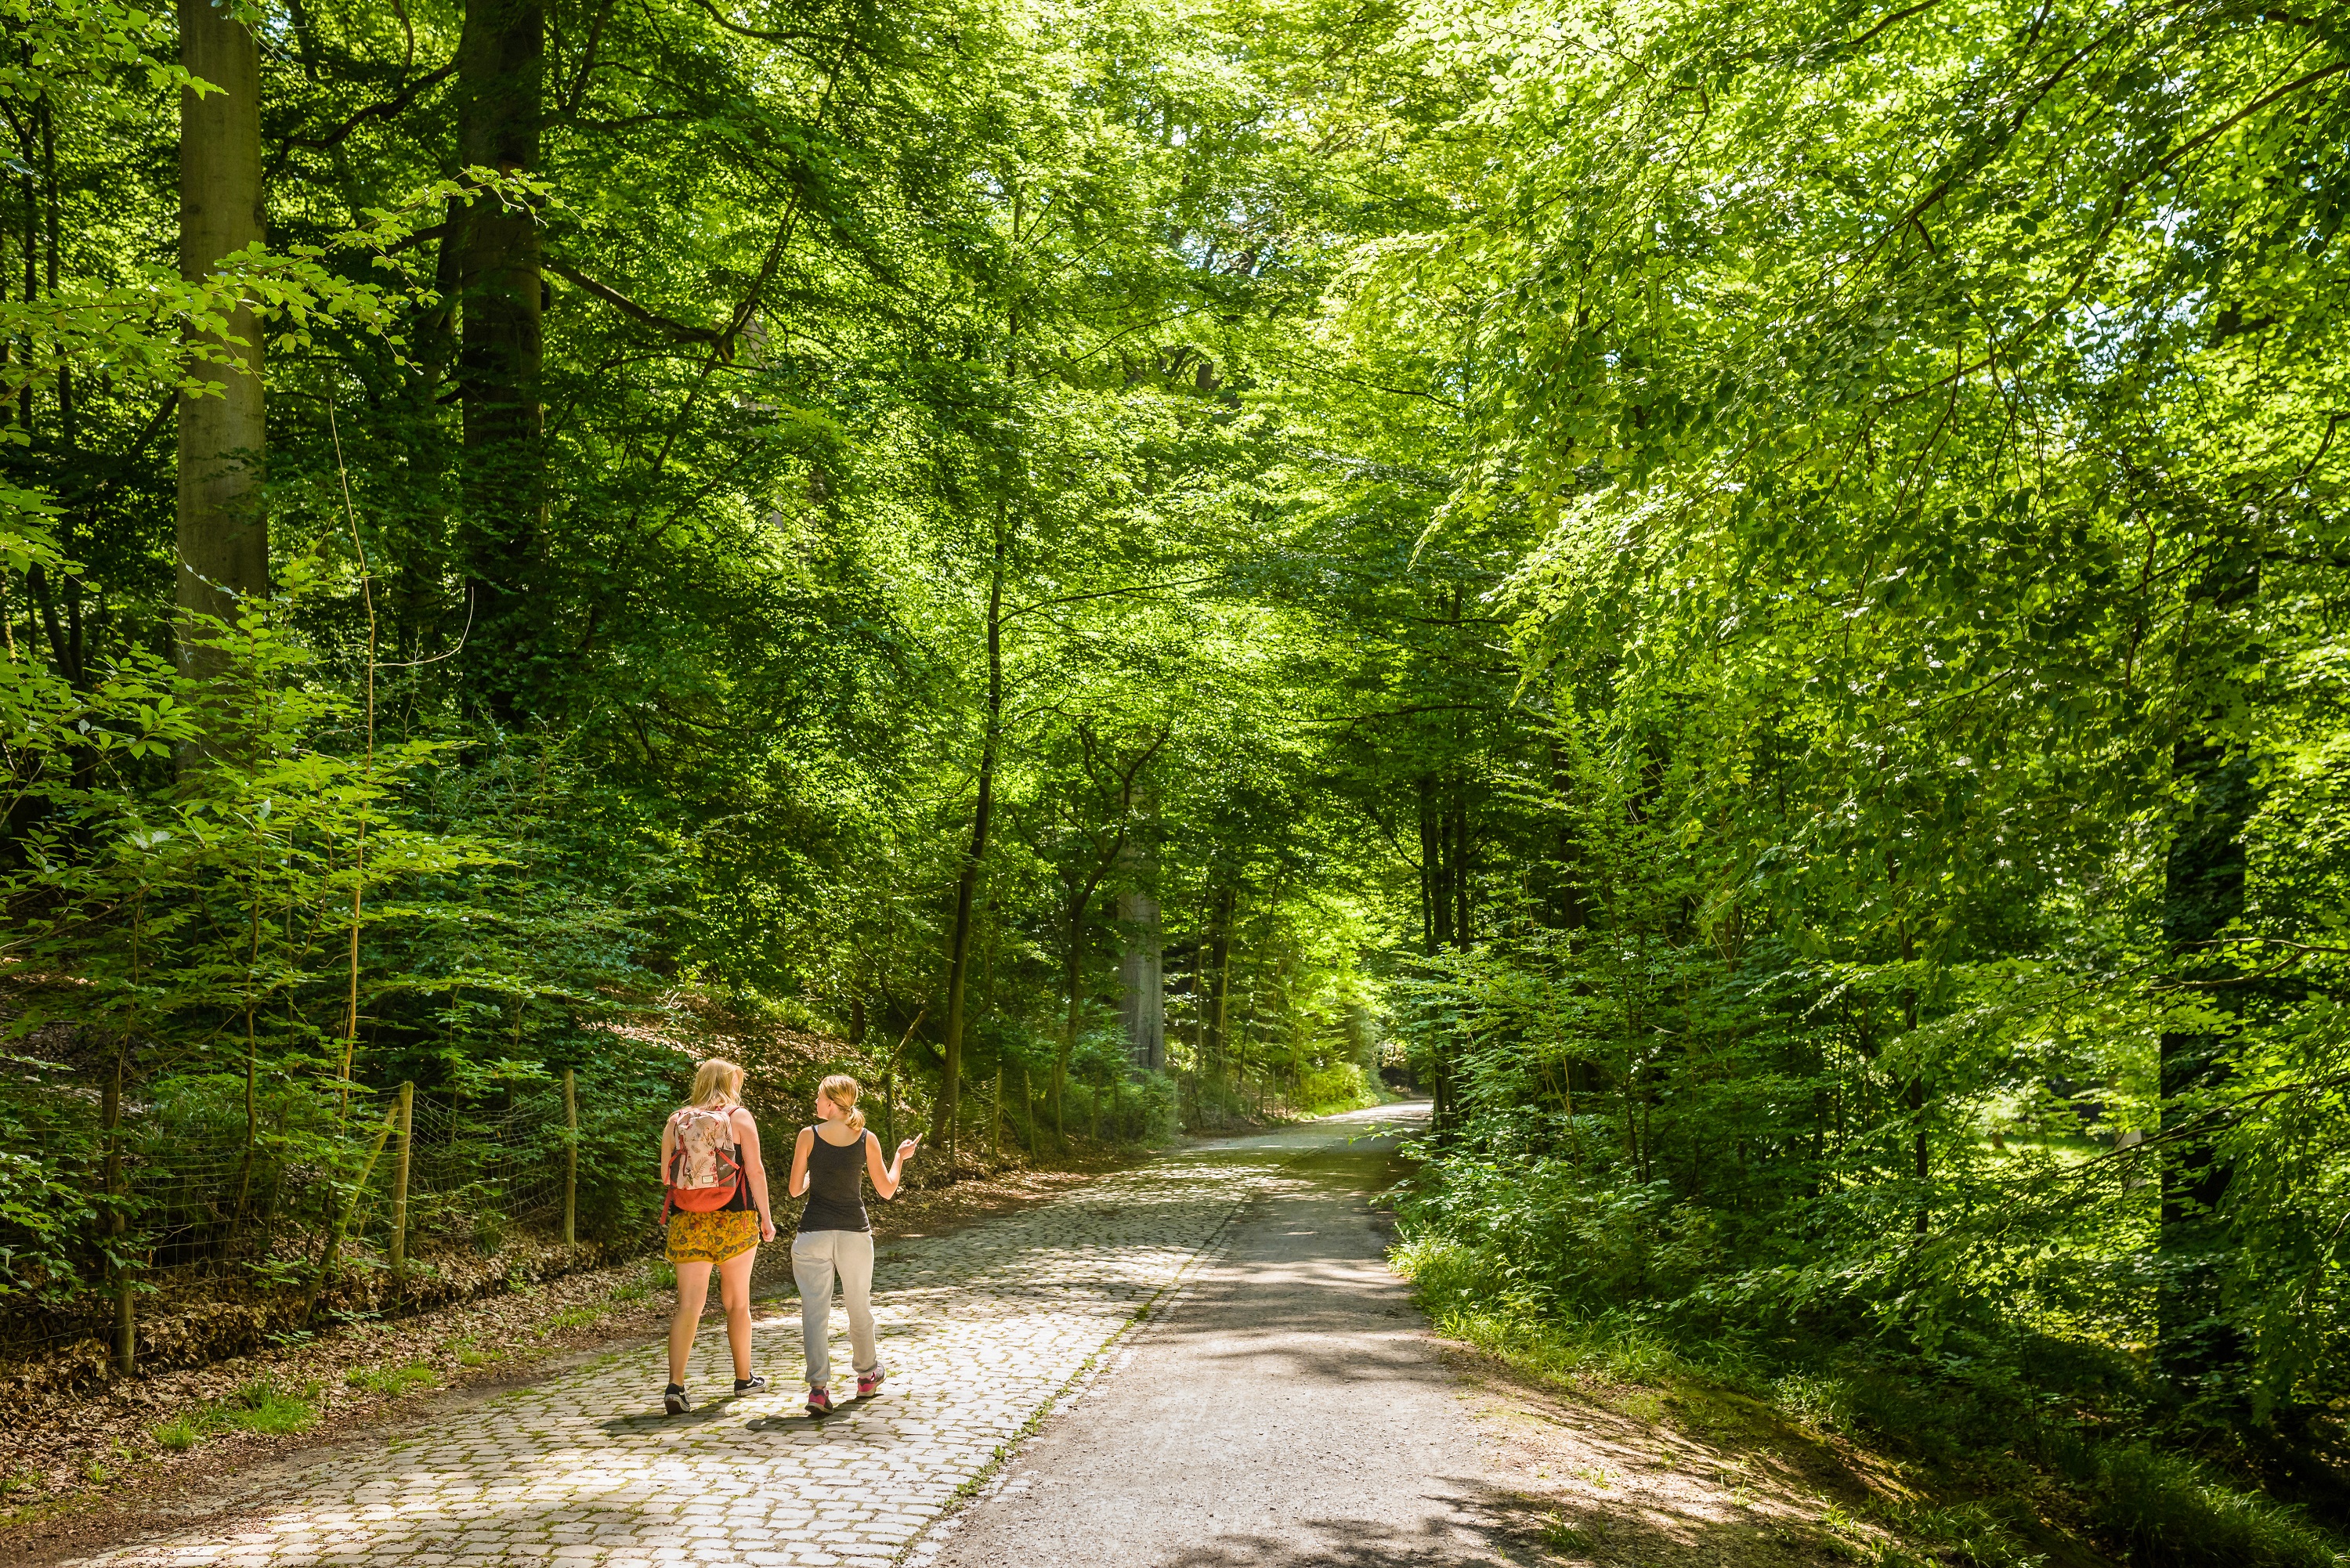 The Sonian forest for forest walks in Belgium